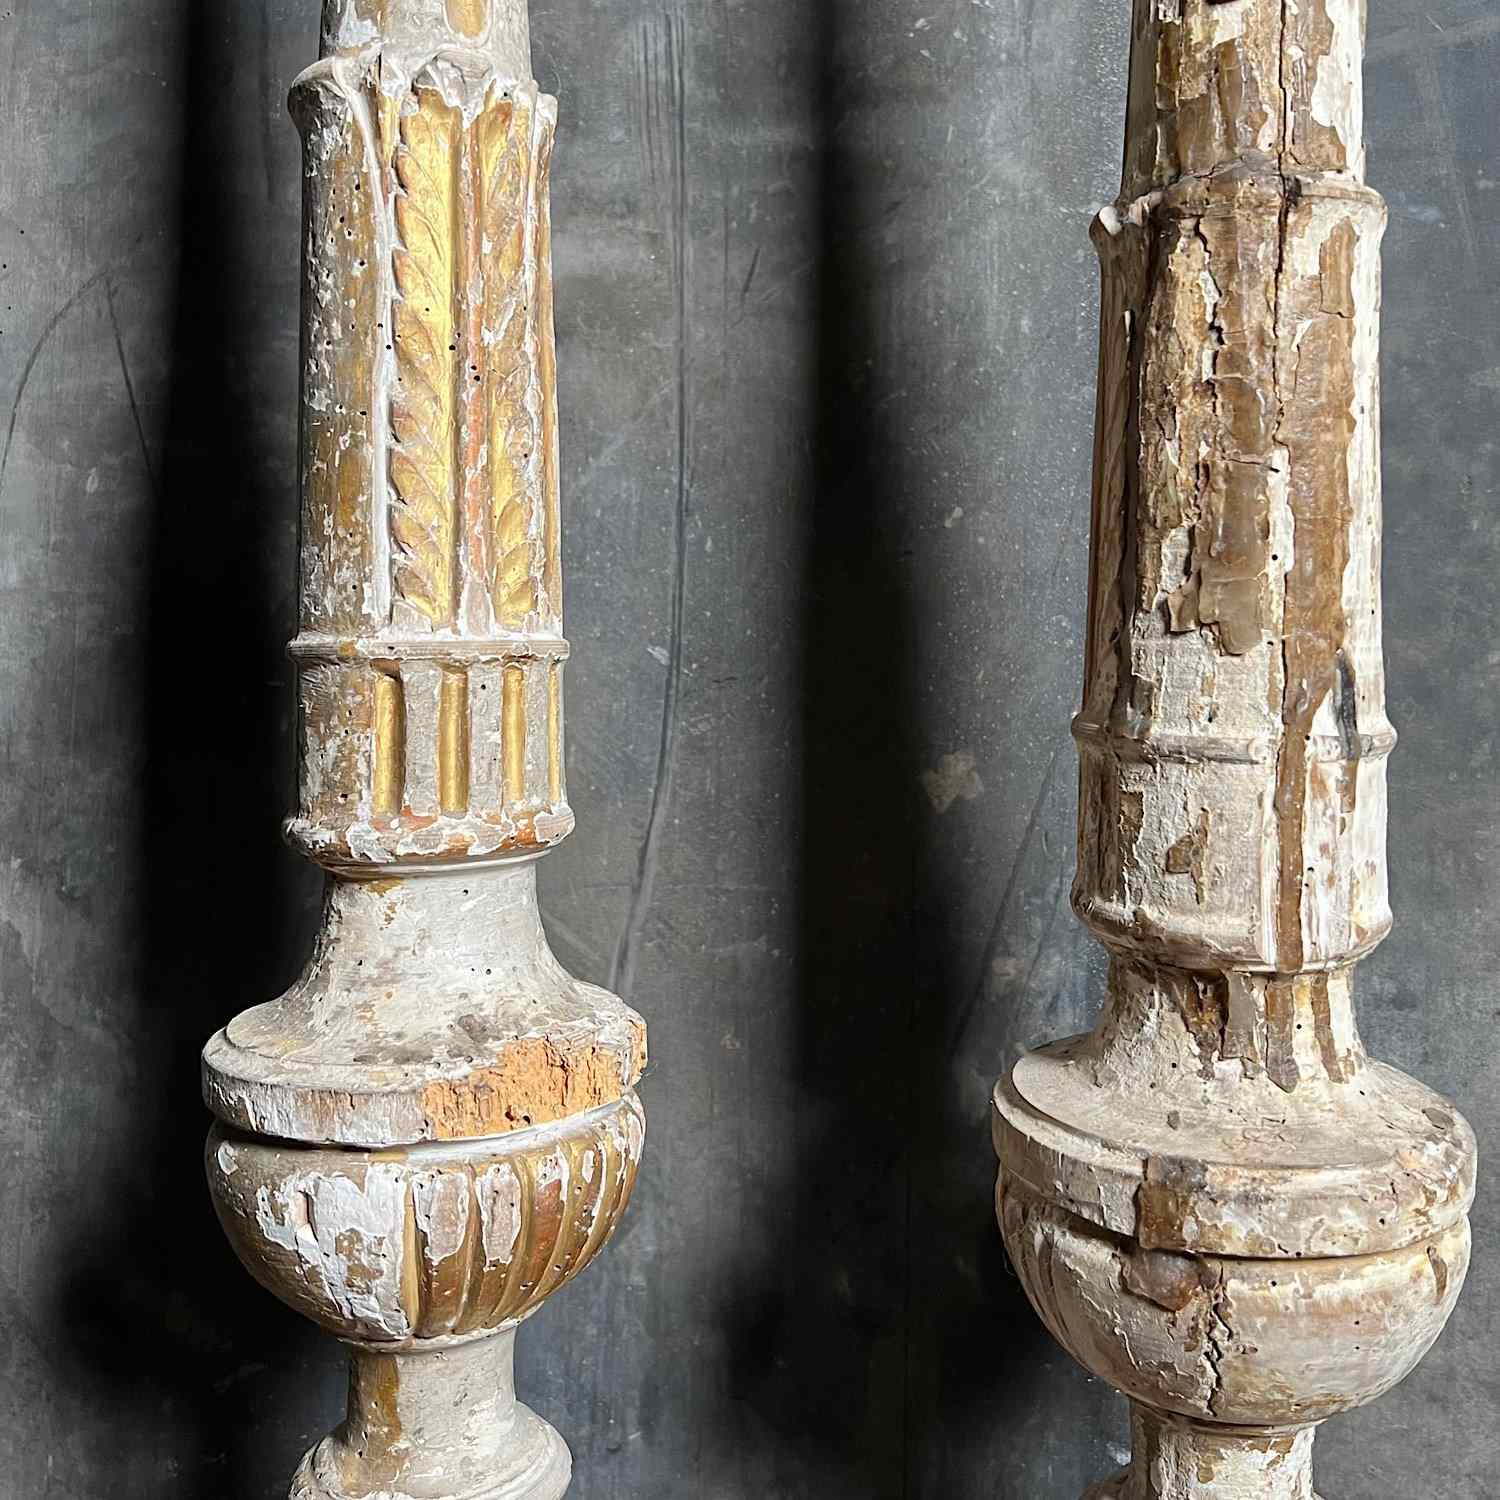 Pair Of Tall Carved Painted Italian Altar Candlesticks Late 17Th/Early 18Th  C. - Decorative Collective